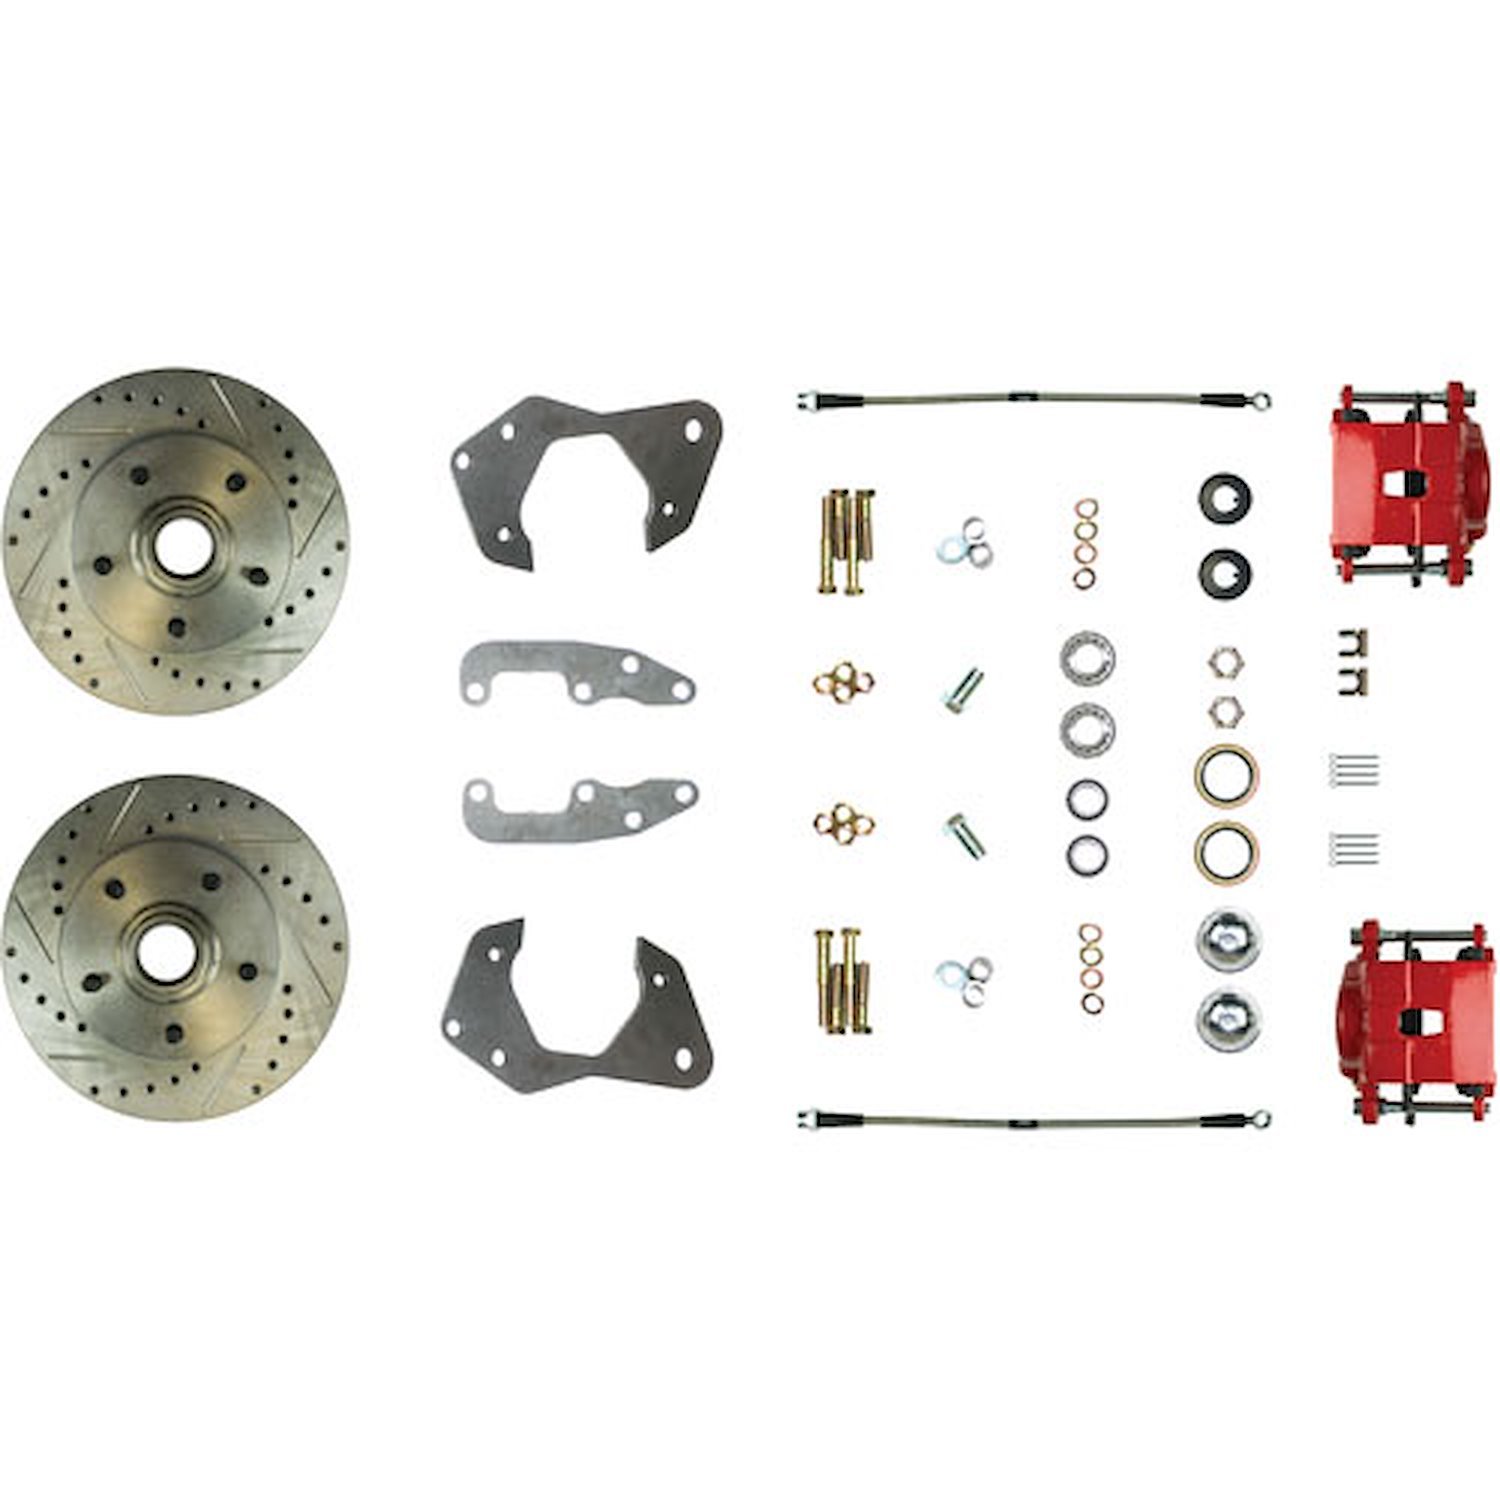 65 - 68 Full Size Chevy Disc Brake Wheel kit With Drilled and Slotted Rotors Red Powder Coated Calip